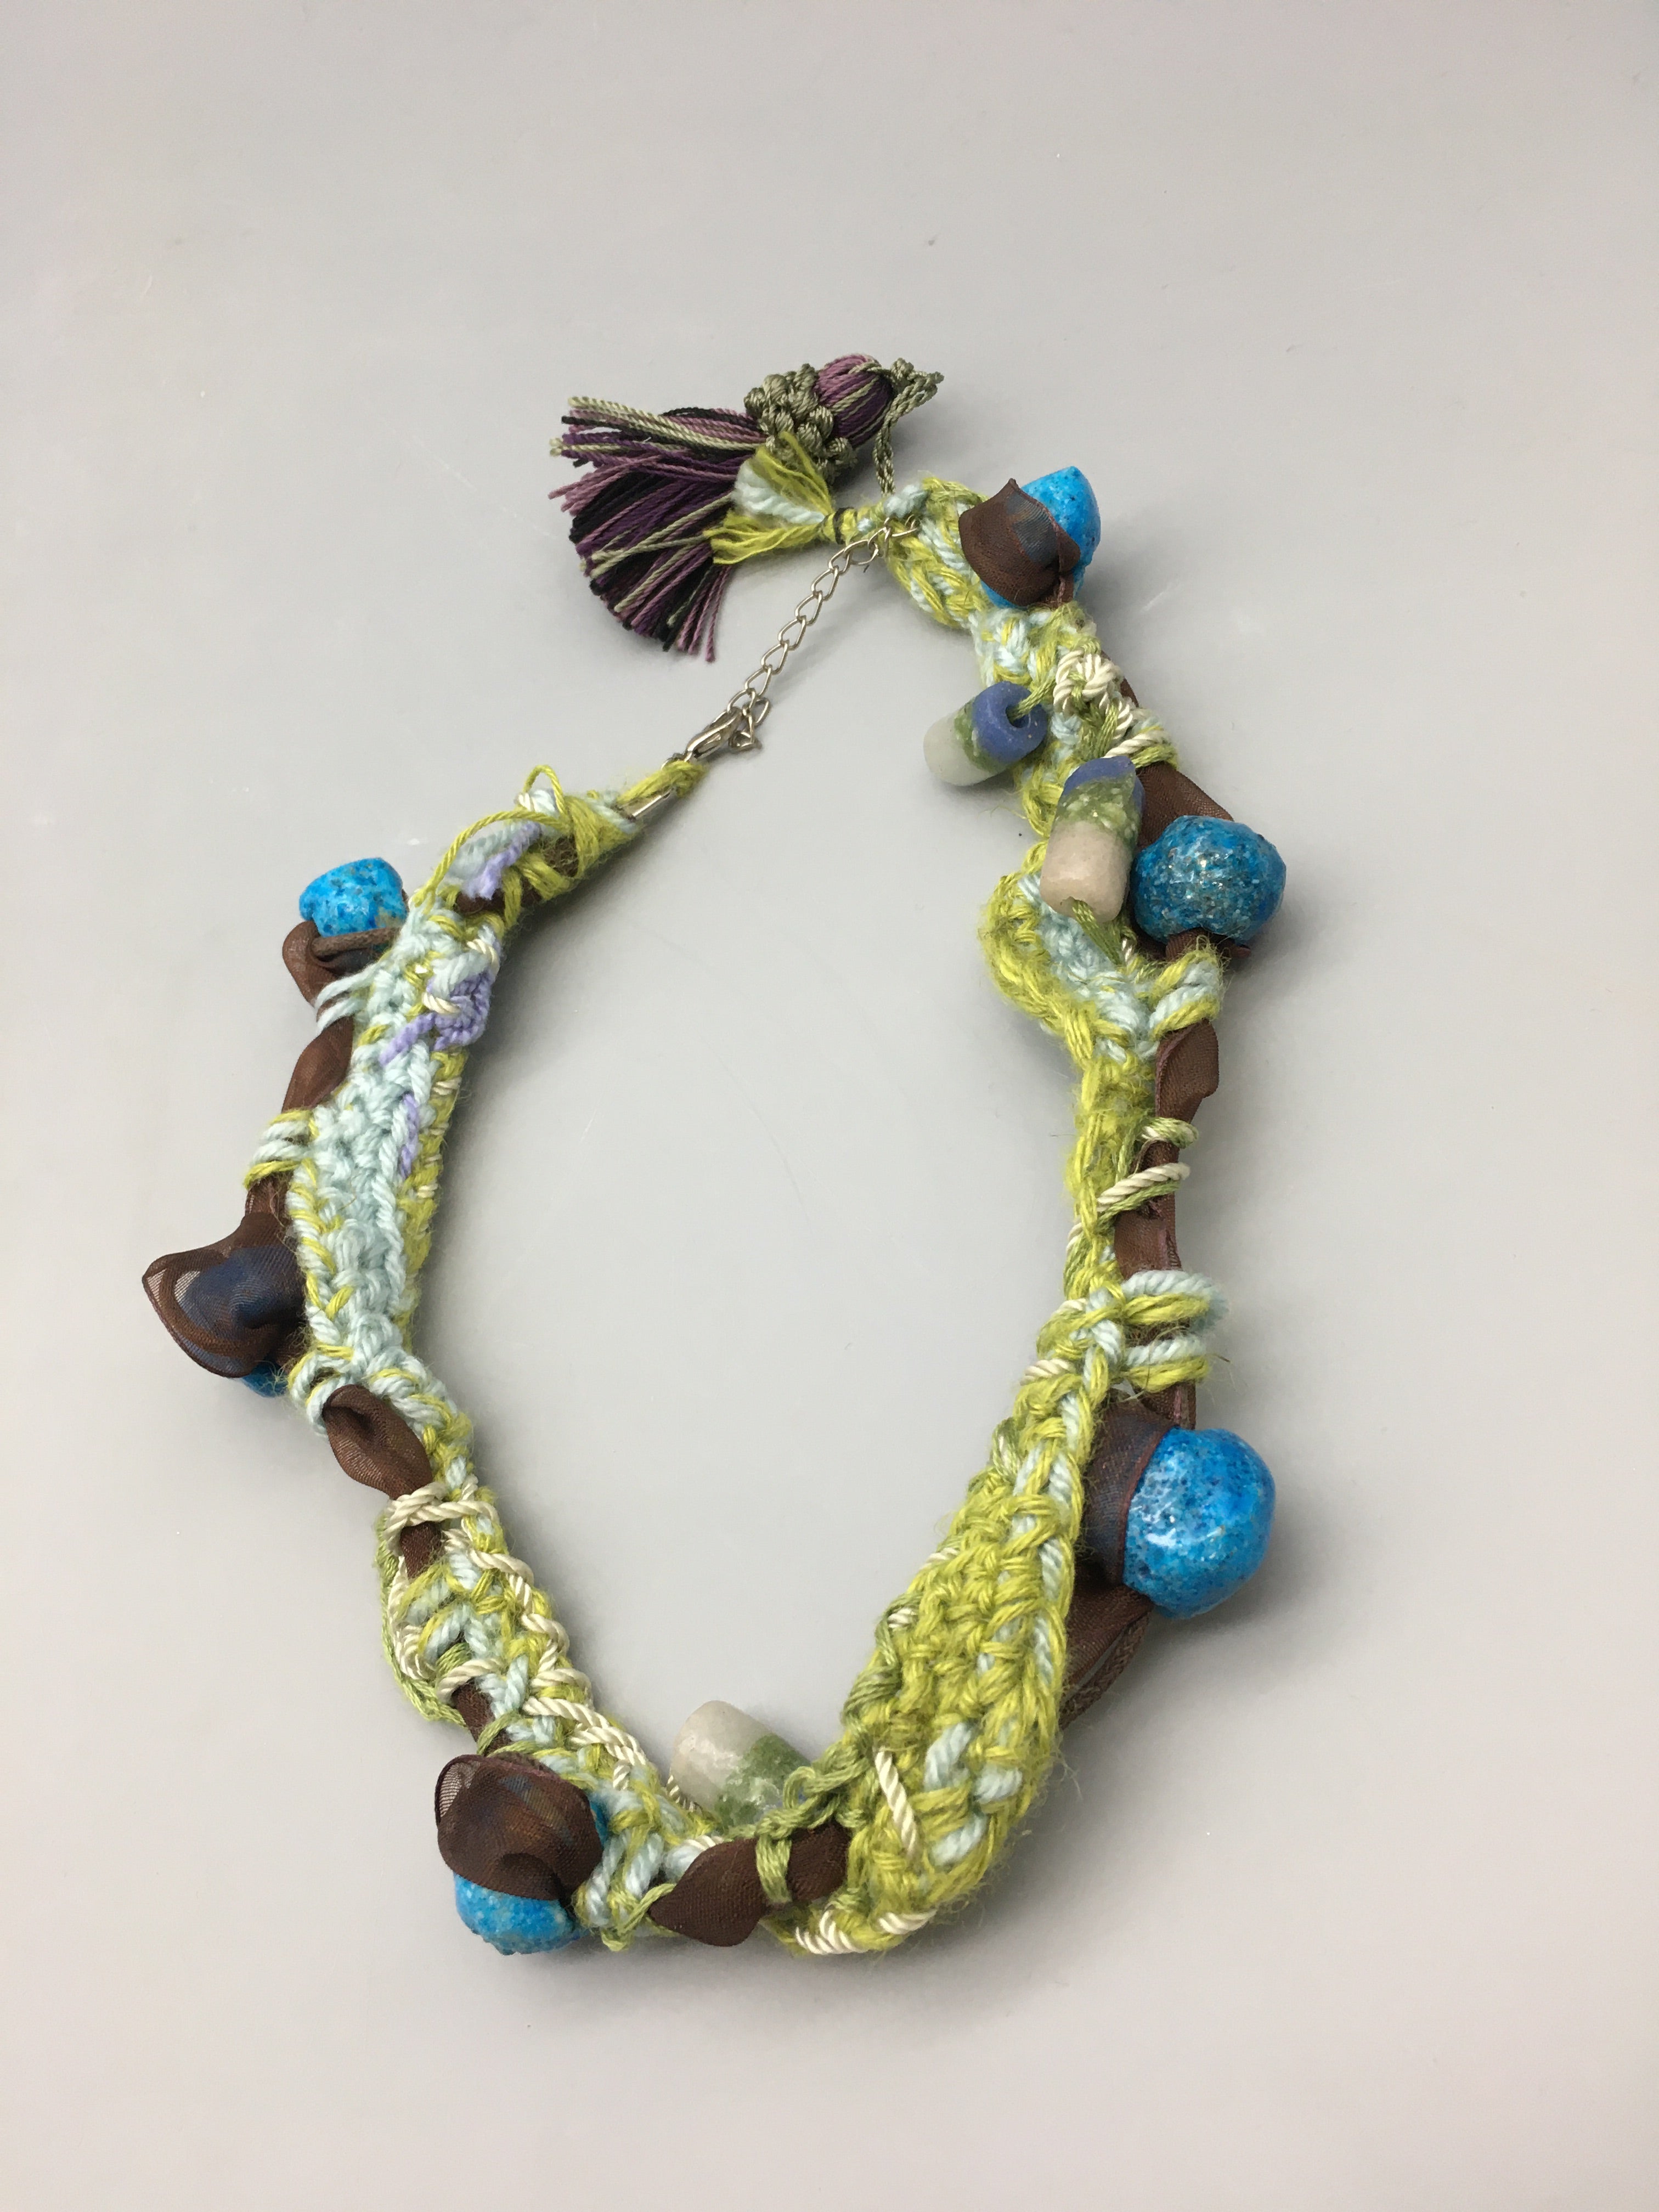 Sally Cooney Anderson-Crochet Necklace